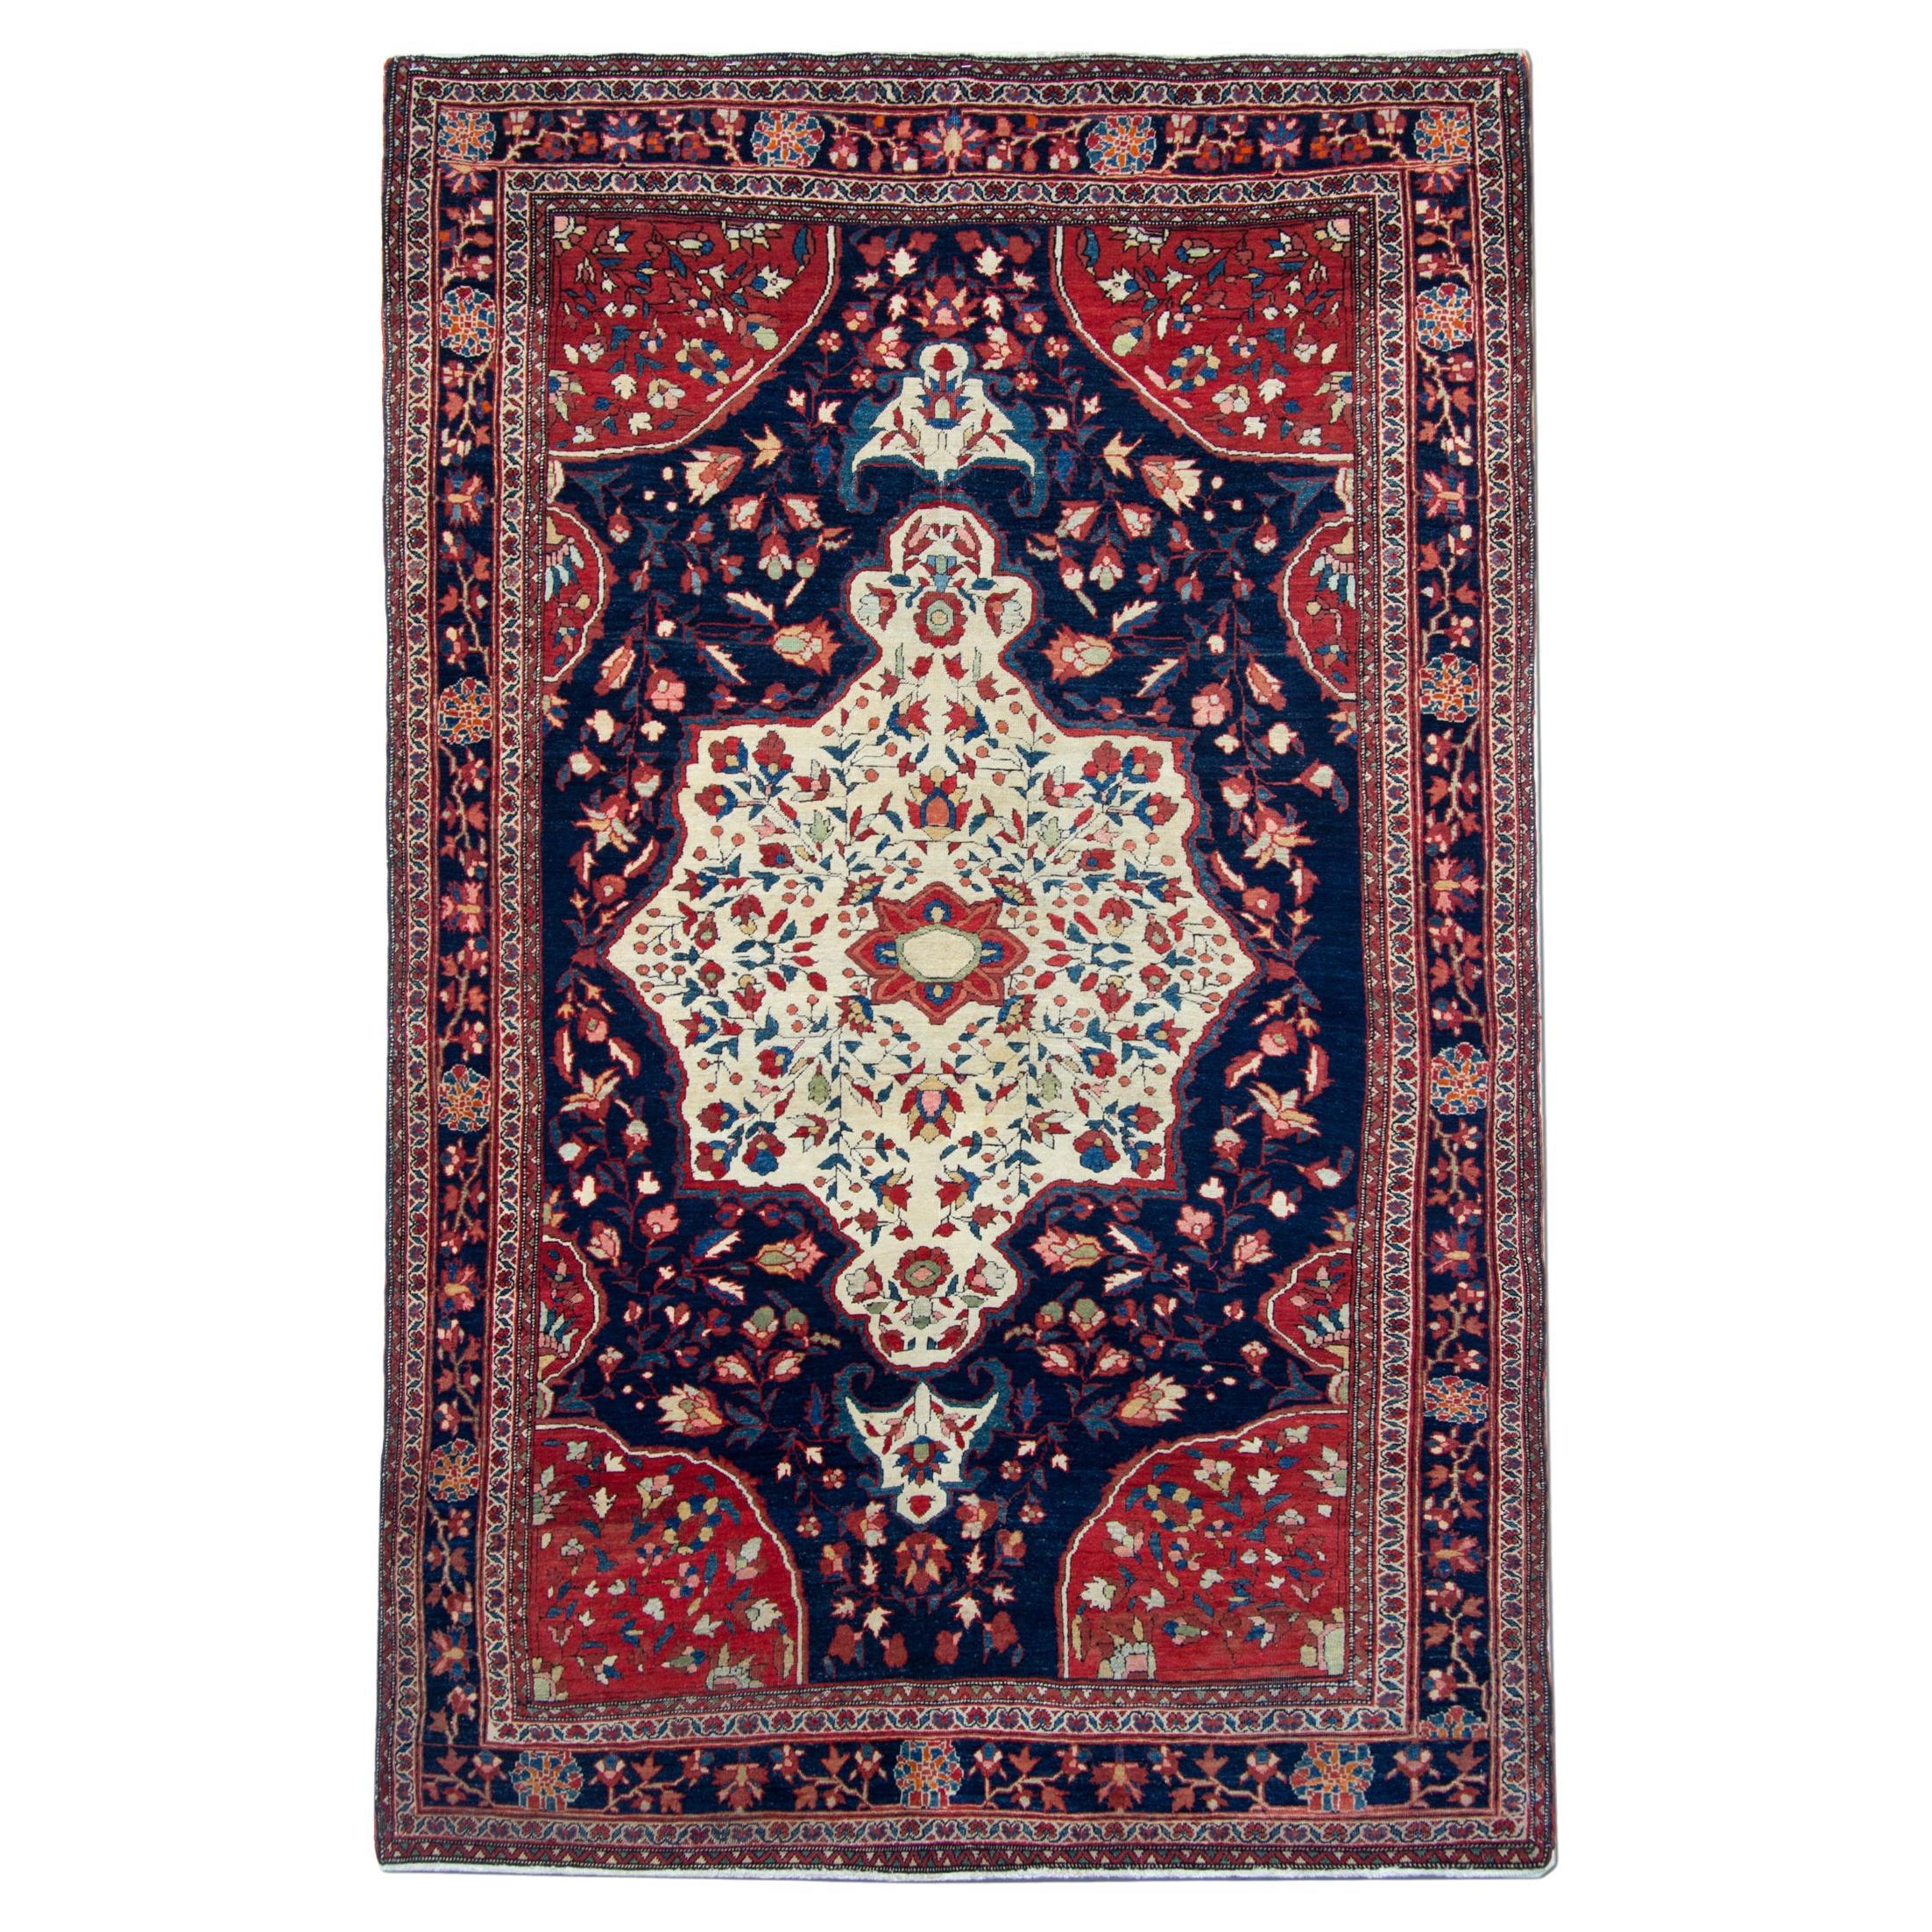 Handmade Carpet Antique Rug Traditional Red Blue Wool Area Rug For Sale